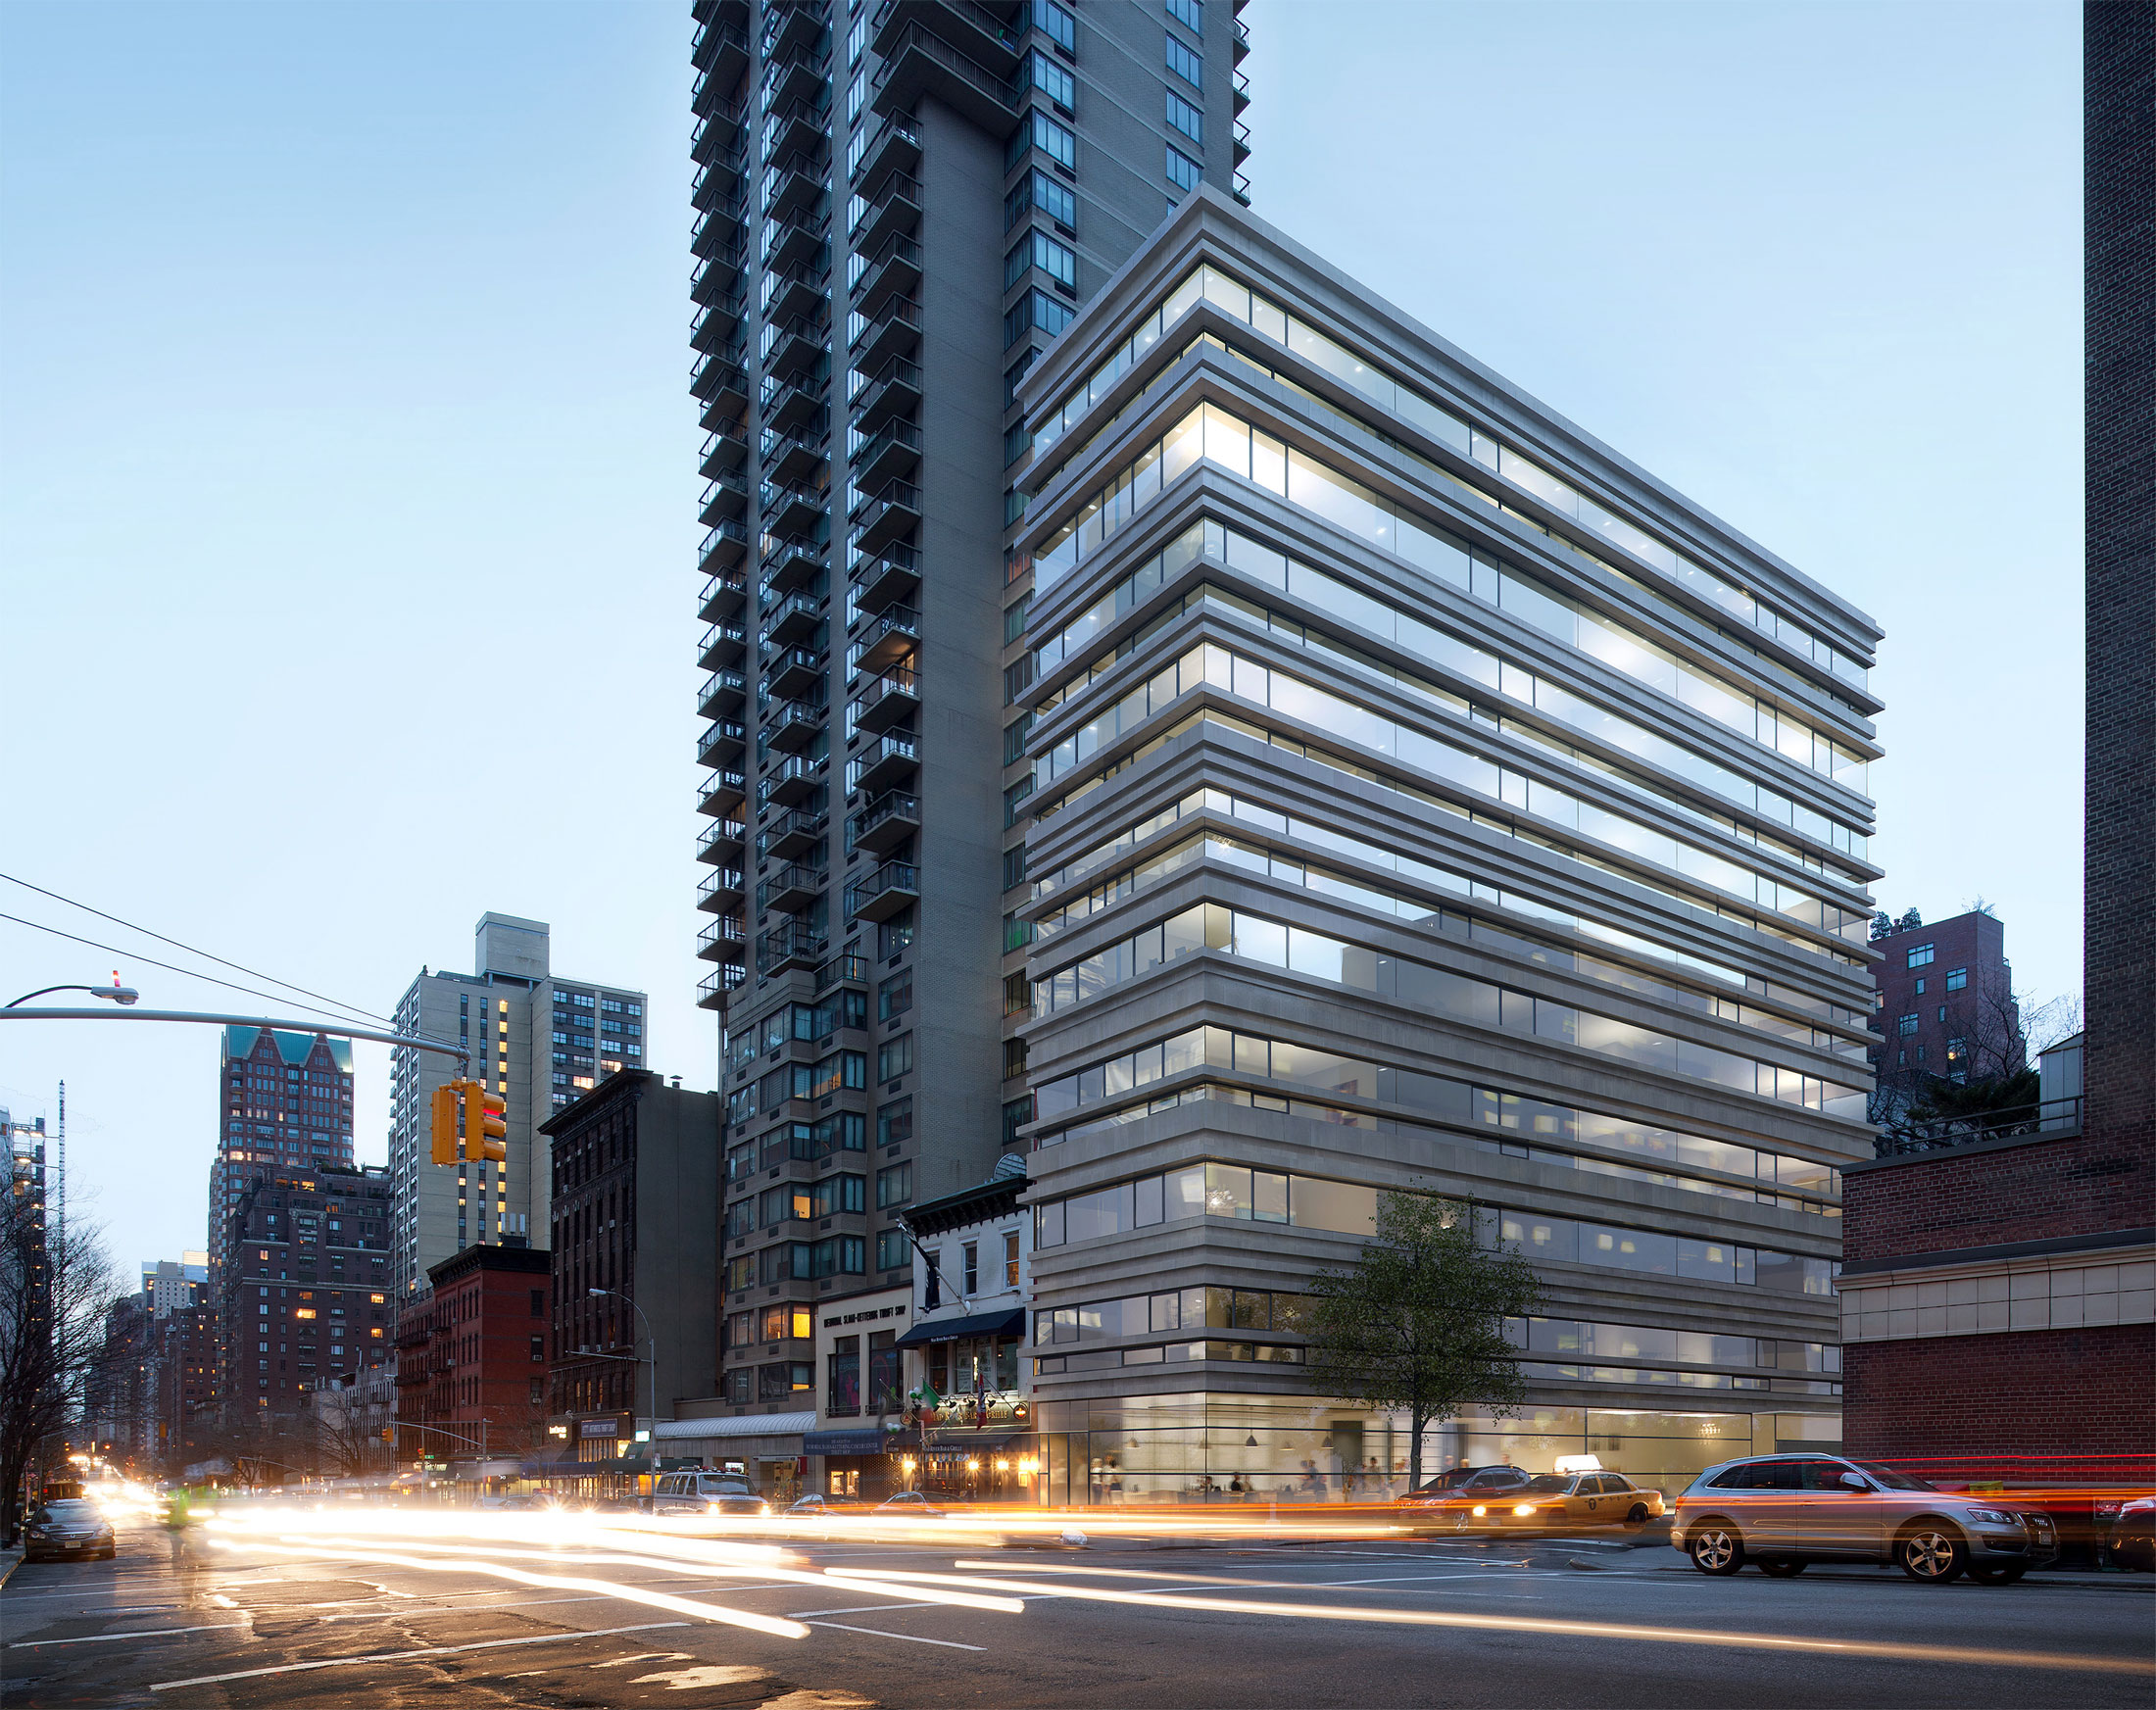 Architectural Rendering of the exterior of the 1444 Third Avenue project located on the Upper East Side, New York City